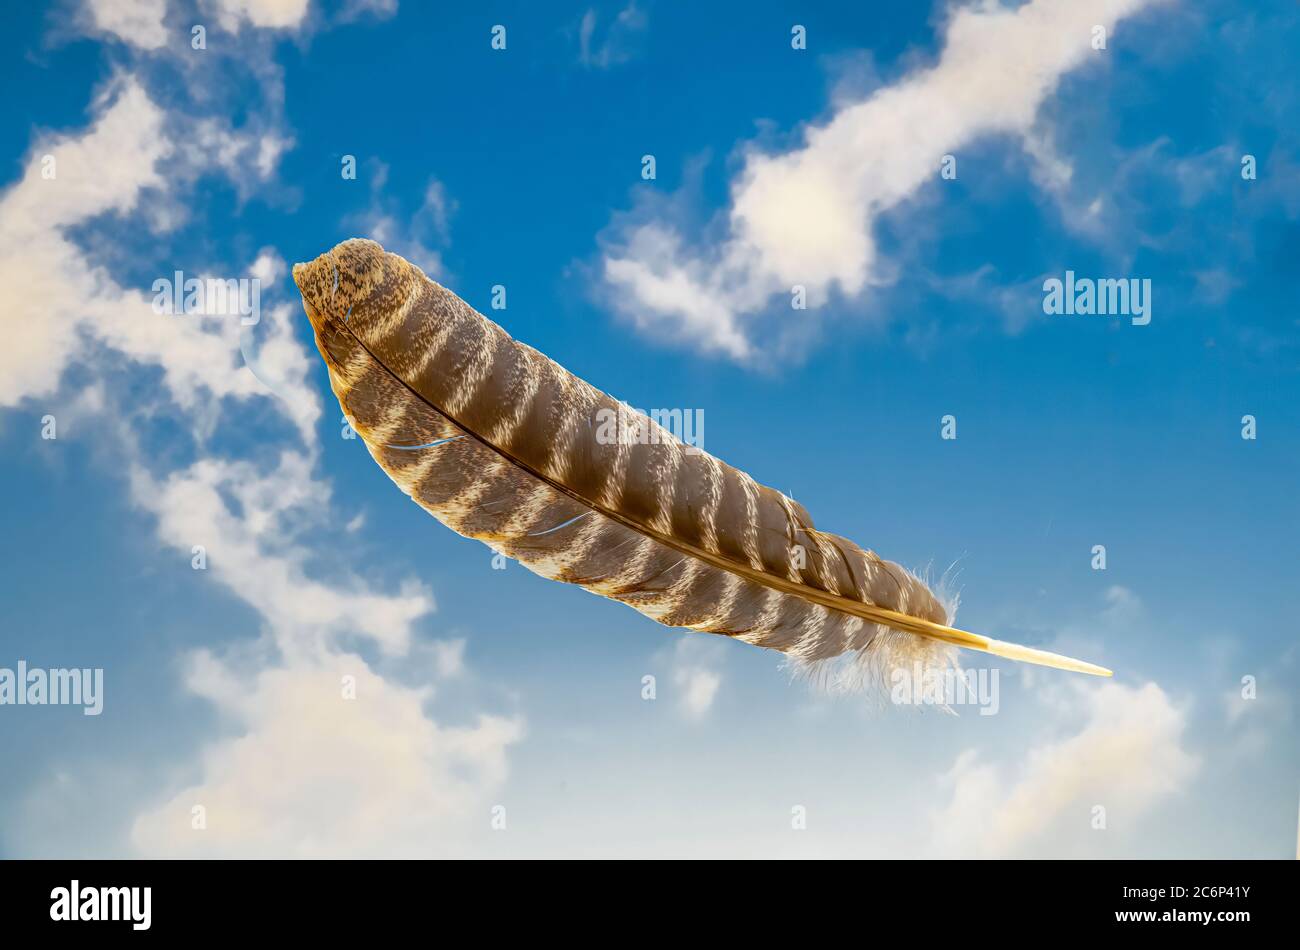 Single feather floating in air with blue sky and white clouds in background Stock Photo